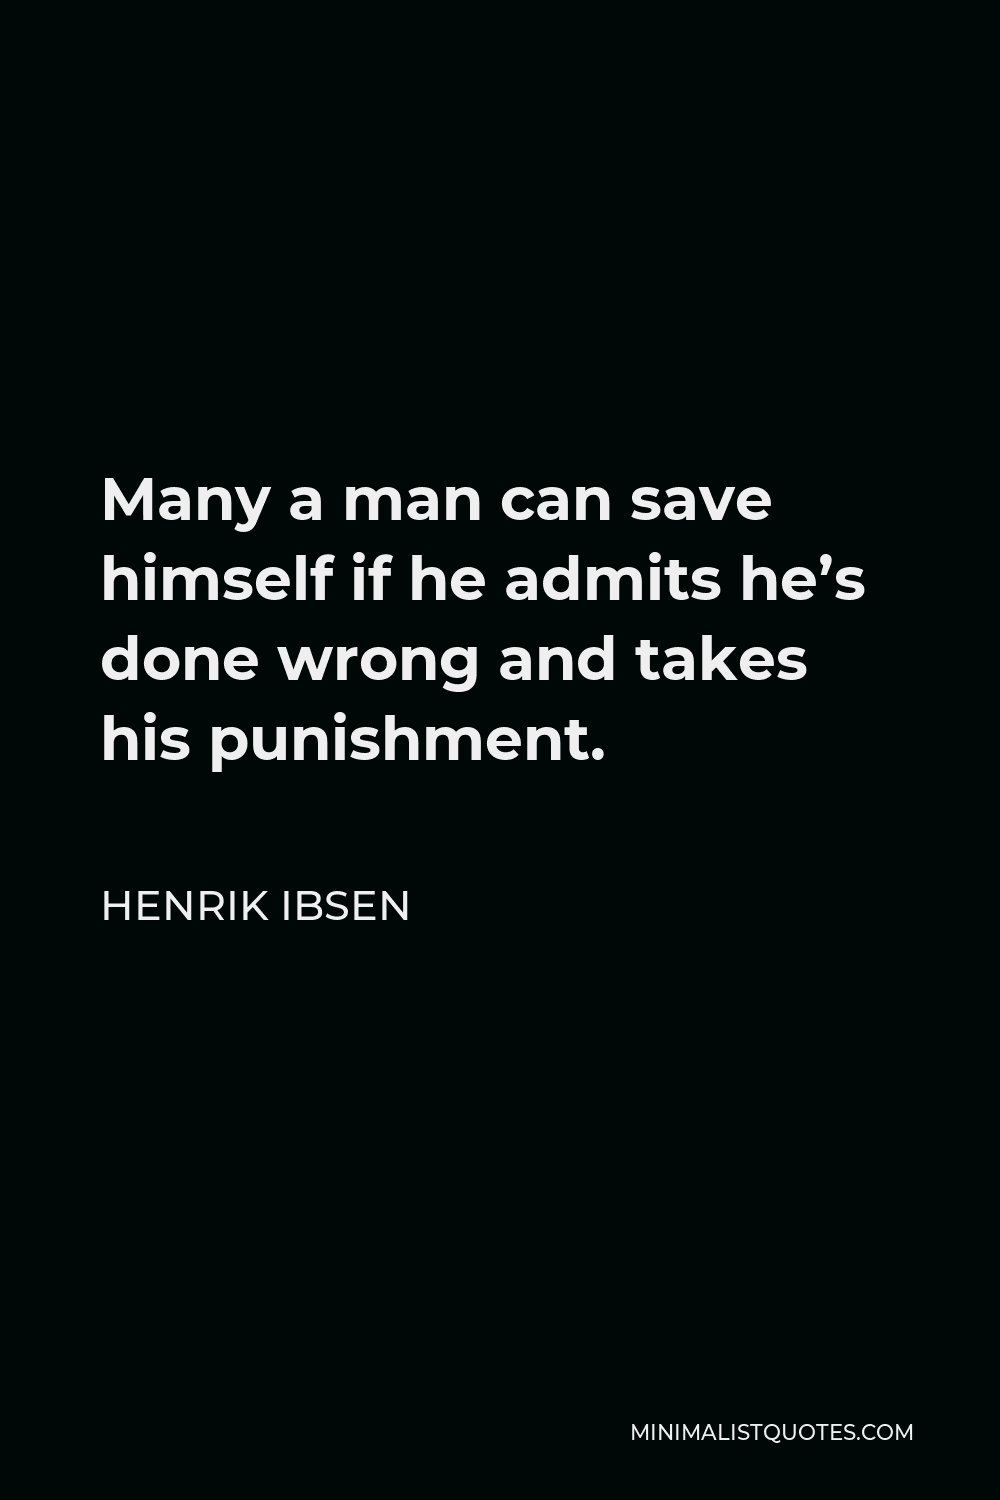 Henrik Ibsen Quote - Many a man can save himself if he admits he’s done wrong and takes his punishment.